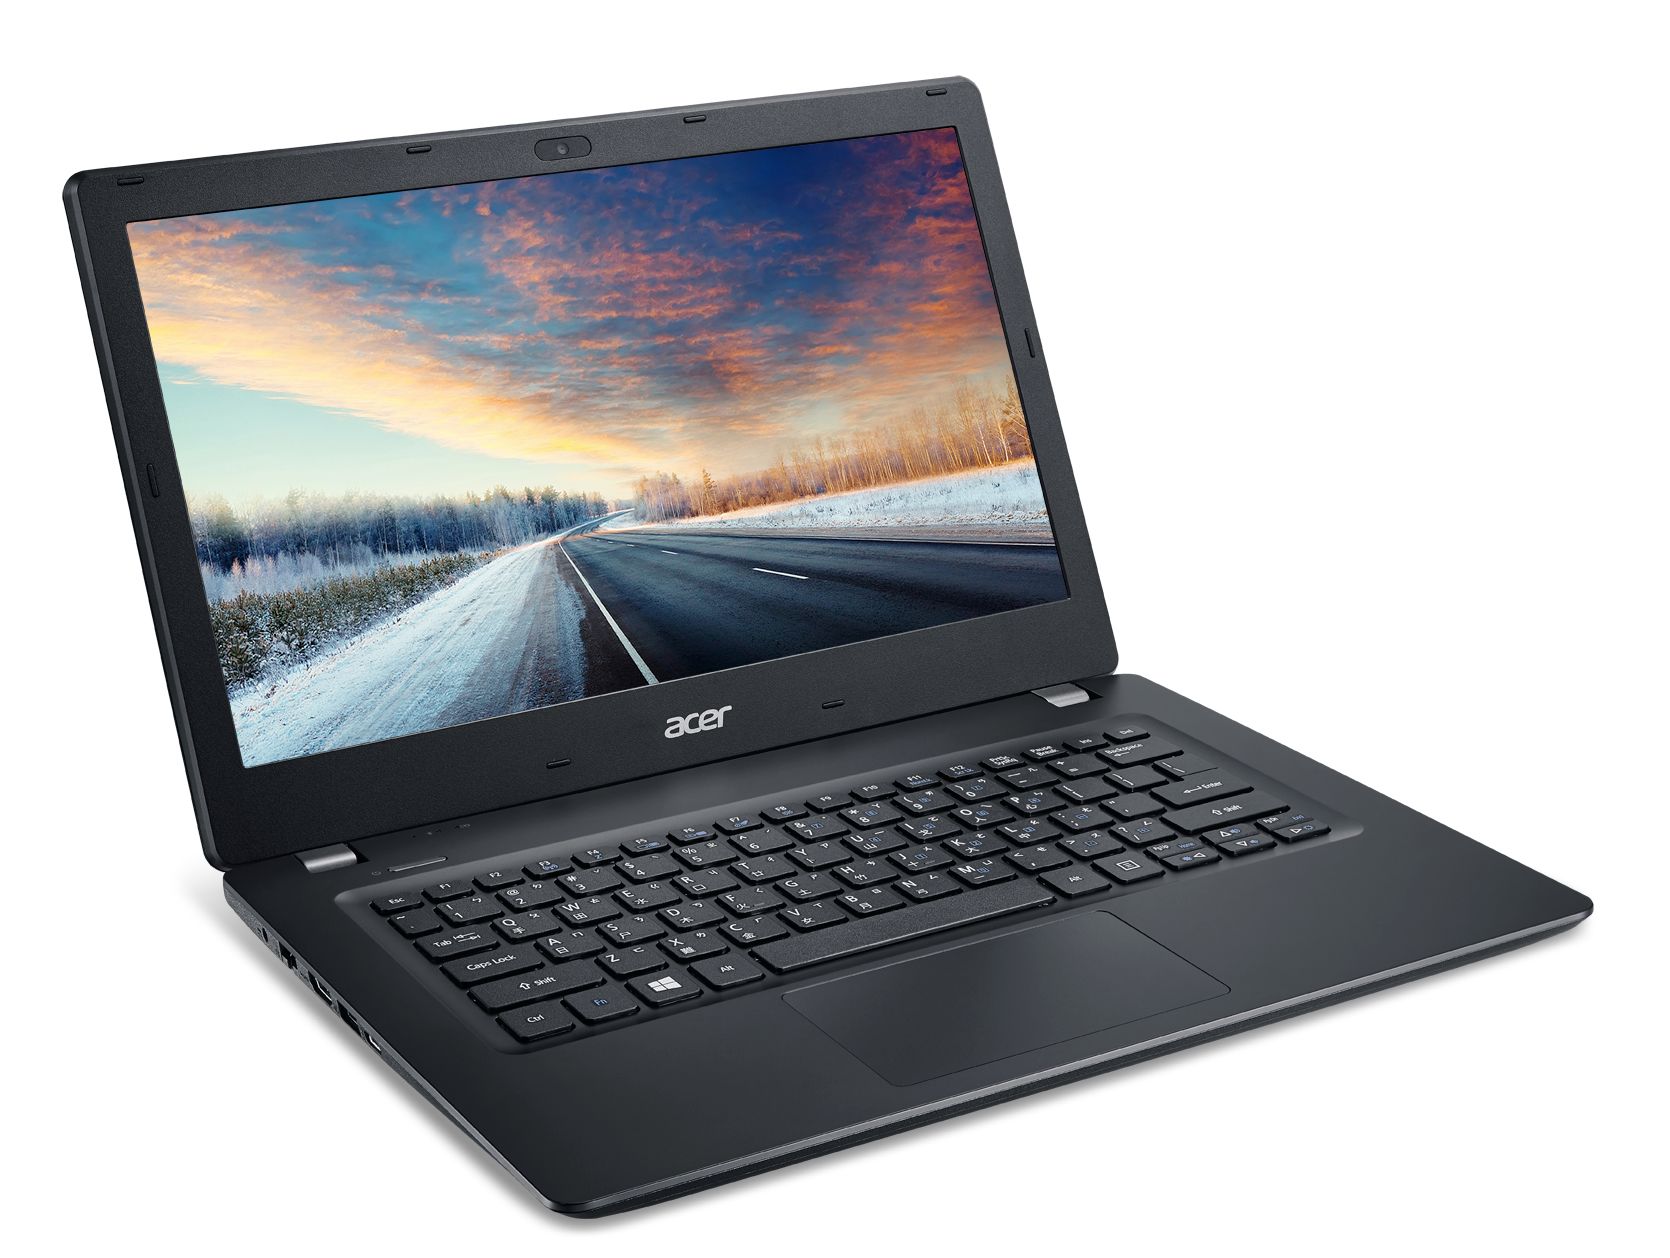 Acer TravelMate P2 TMP259 15.6in